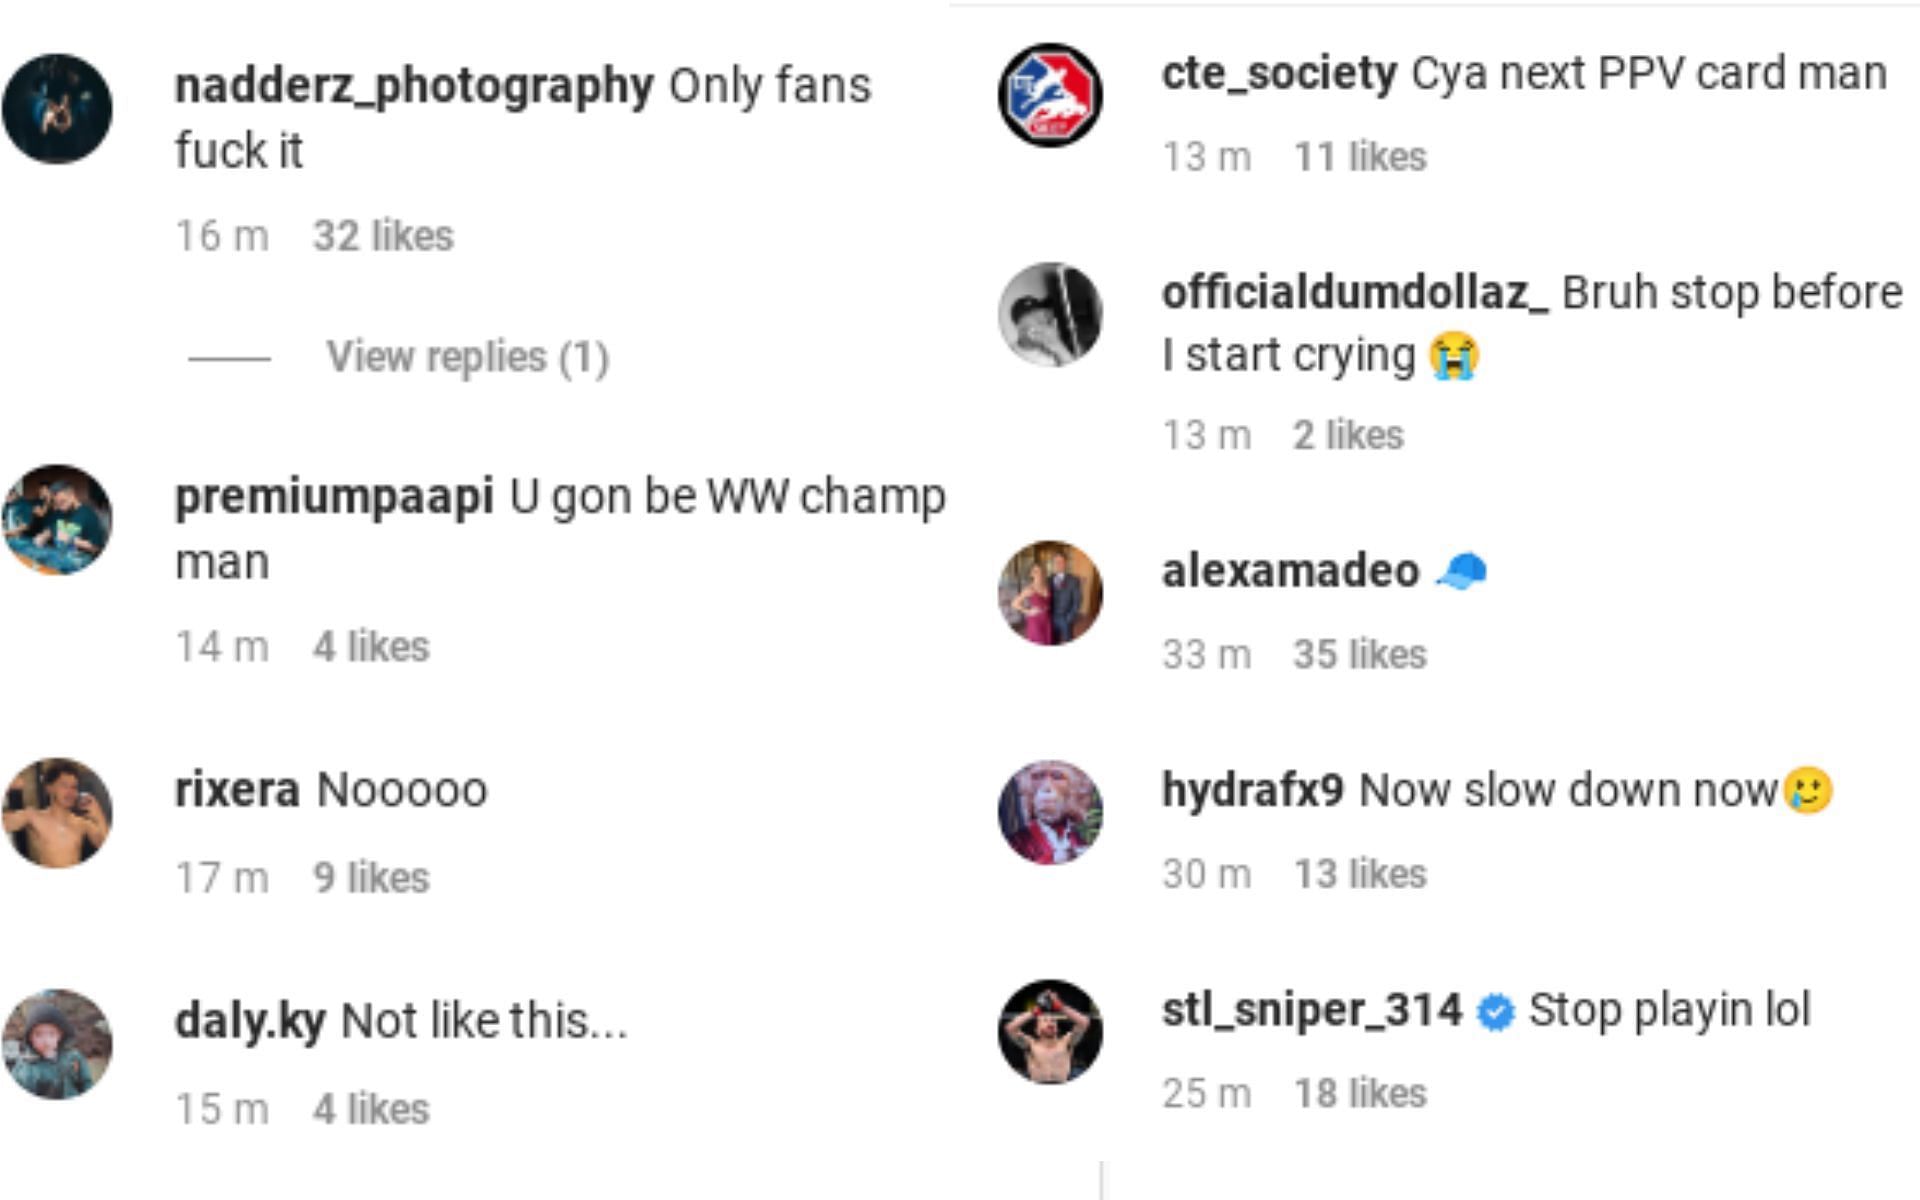 The rest of the fan reaction